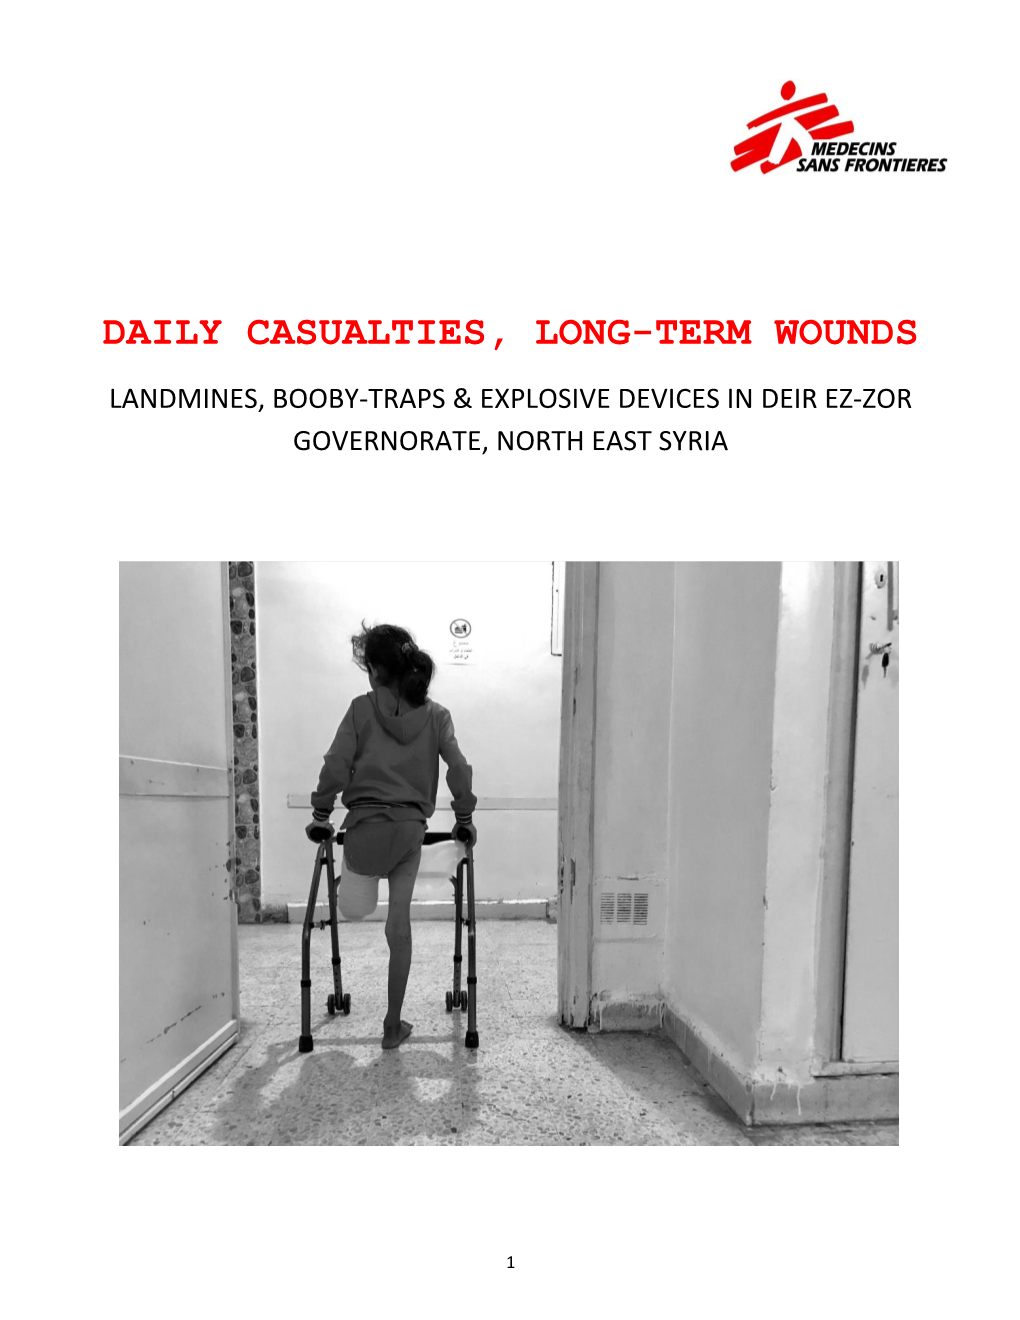 Daily Casualties, Long-Term Wounds